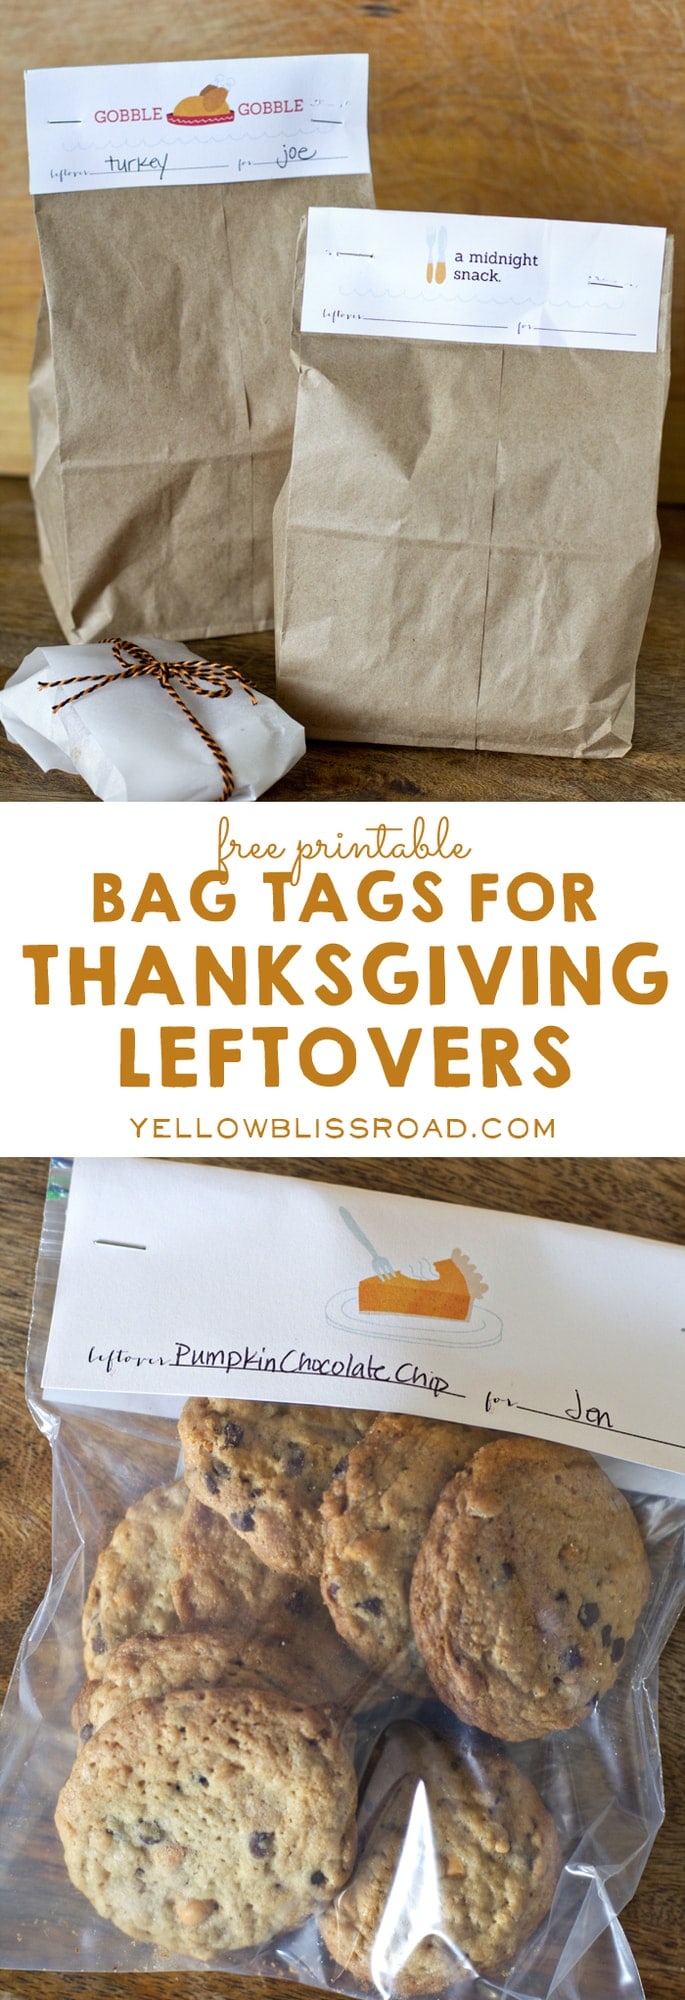 Bag Tags for Thanksgiving Leftovers